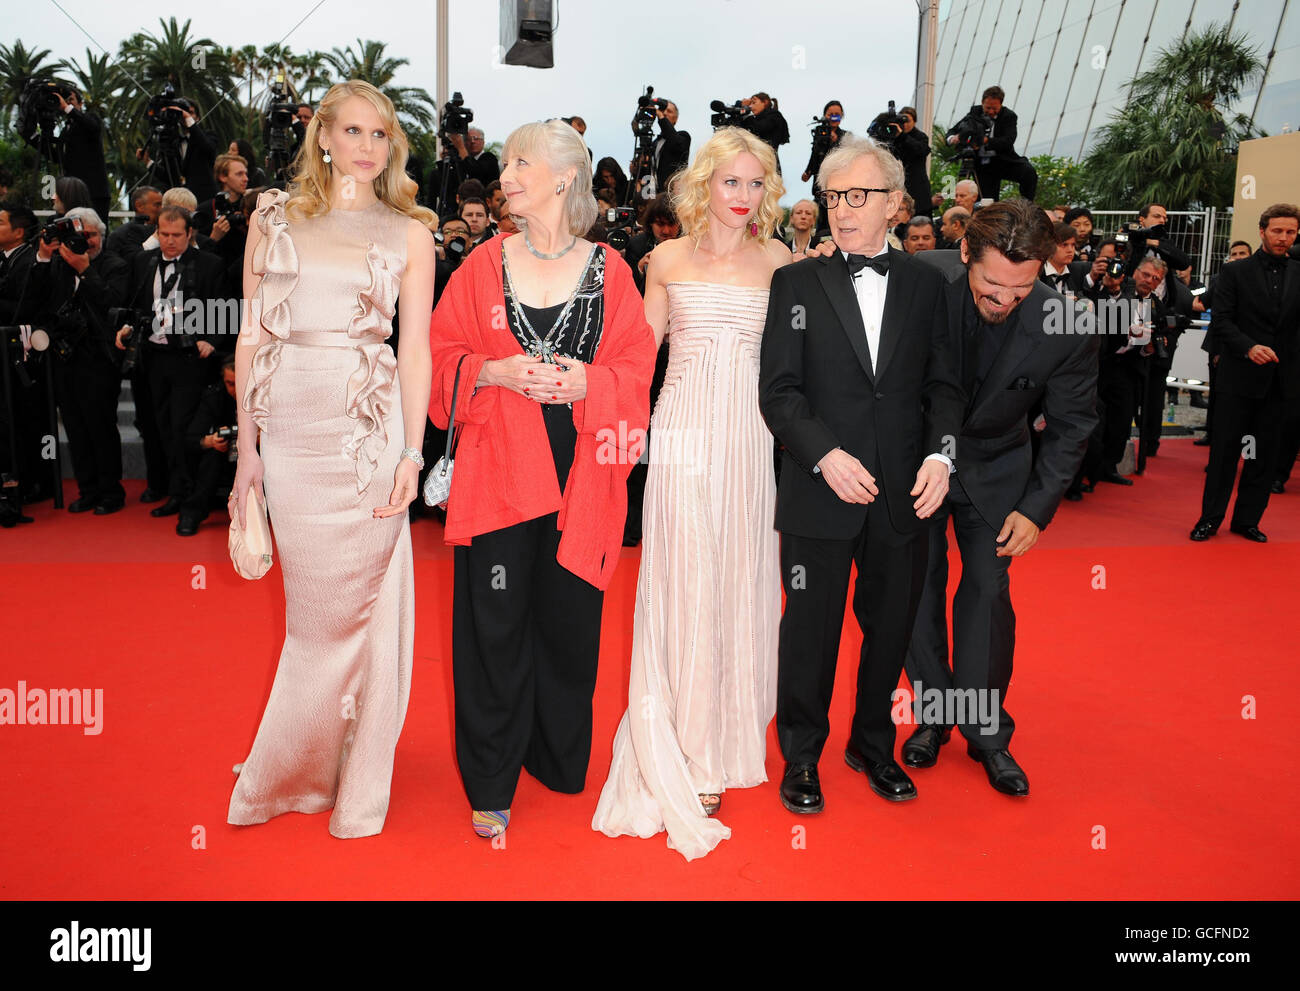 (Left to right) Lucy Punch, Gemma Jones, Naomi Watts, Woody Allen and Josh Brolin arrive for the premiere of You Will Meet A Tall Dark Stranger, at the 63rd Cannes Film Festival, France. Stock Photo